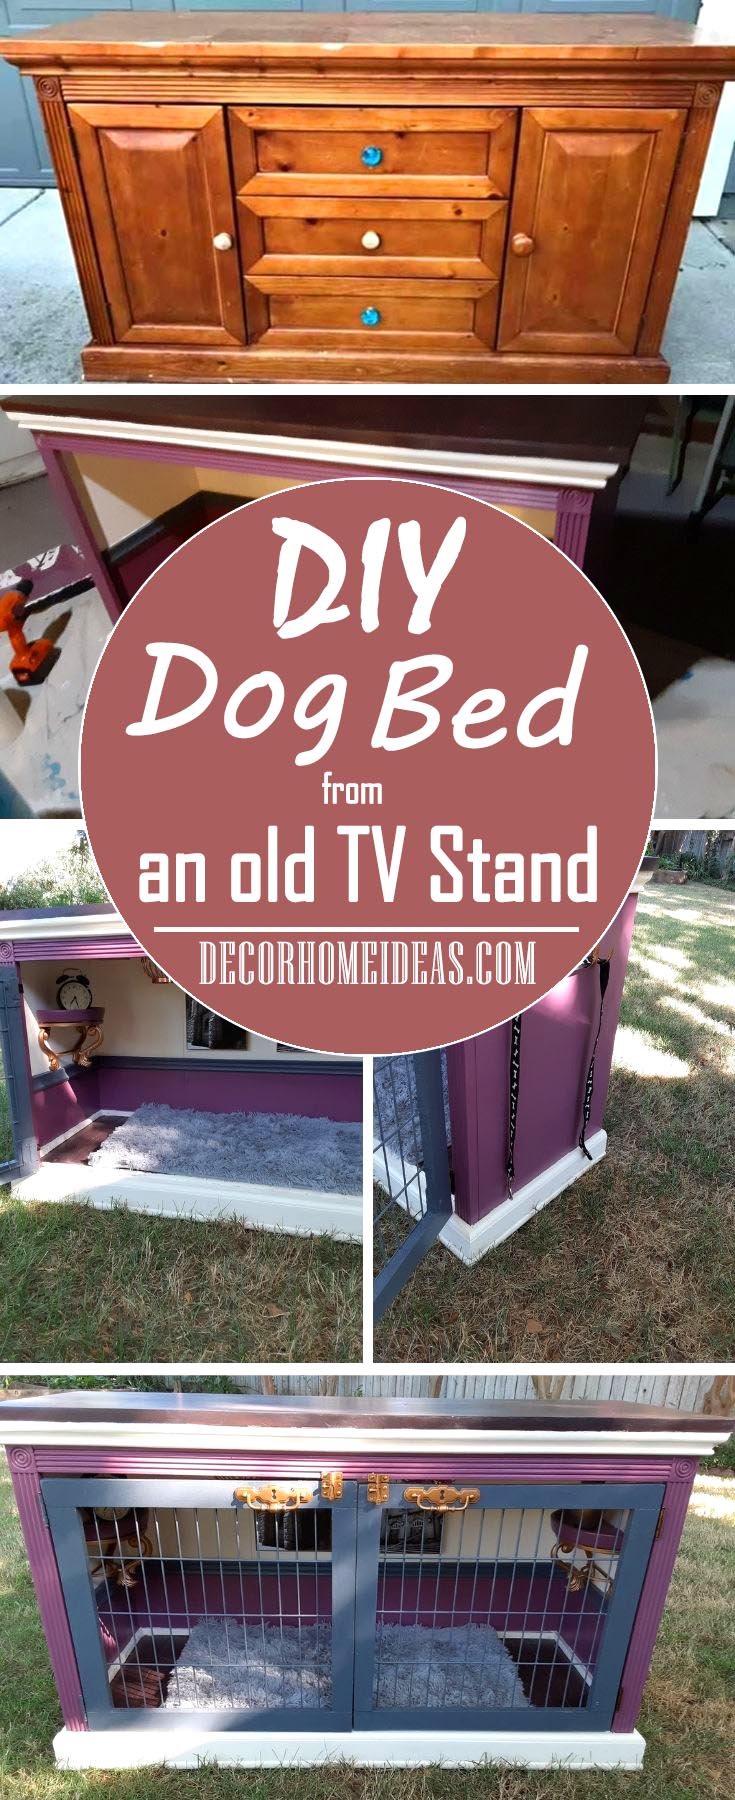 How to DIY dog bed from an old TV stand. Step bƴ step ınstructıons and materıals needed for the best dog house wıth bed.